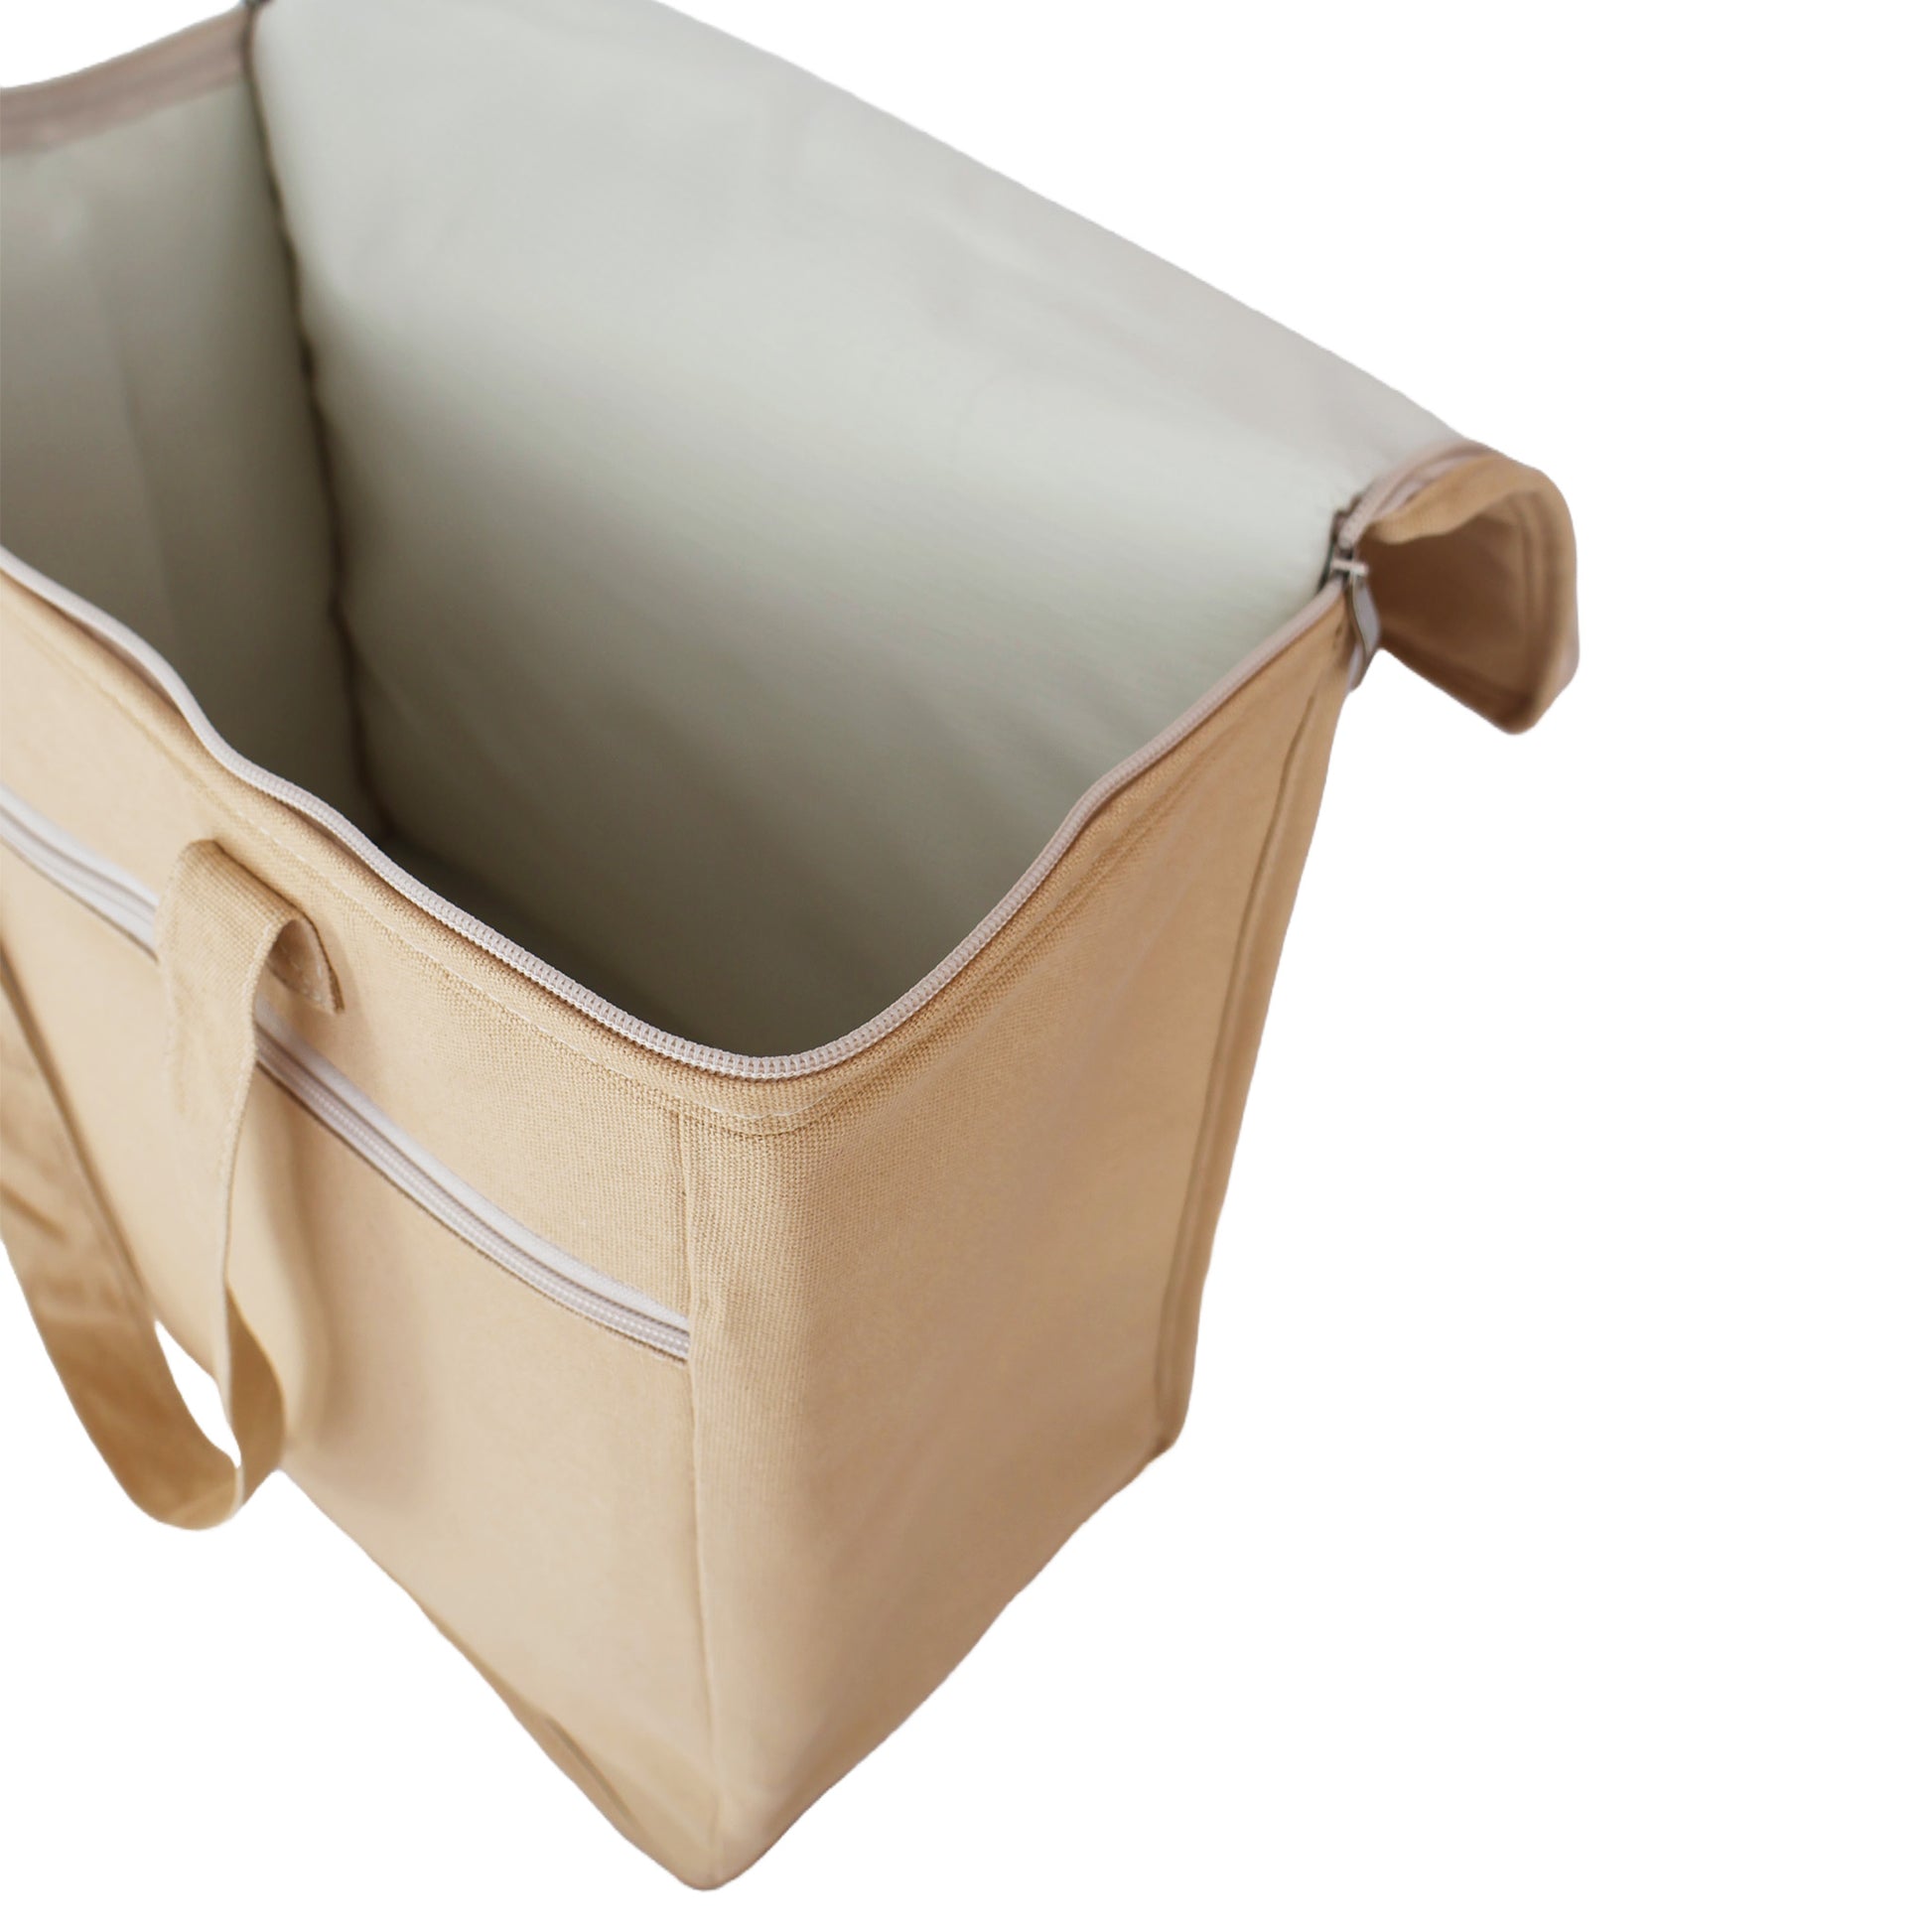 Inside view of the picnic cooler bag in sand, made from cotton canvas, large main insulated compartment and smaller front zippered compartment for keys, wallet and phone.  For beach and picnic days, buy well and buy once.